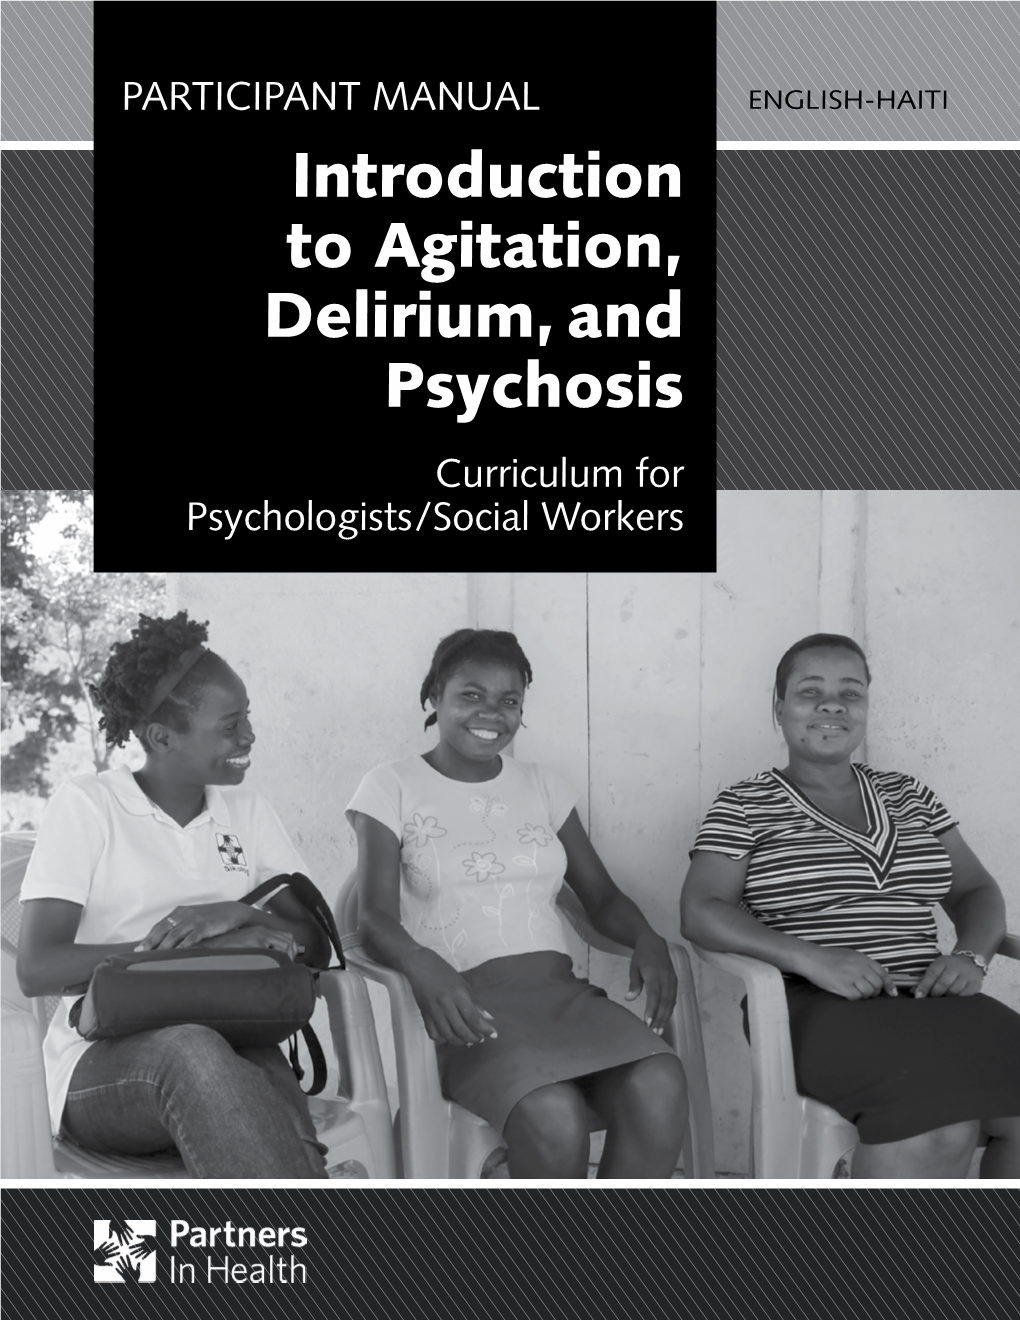 Introduction to Agitation, Delirium, and Psychosis Curriculum for Psychologists/Social Workers